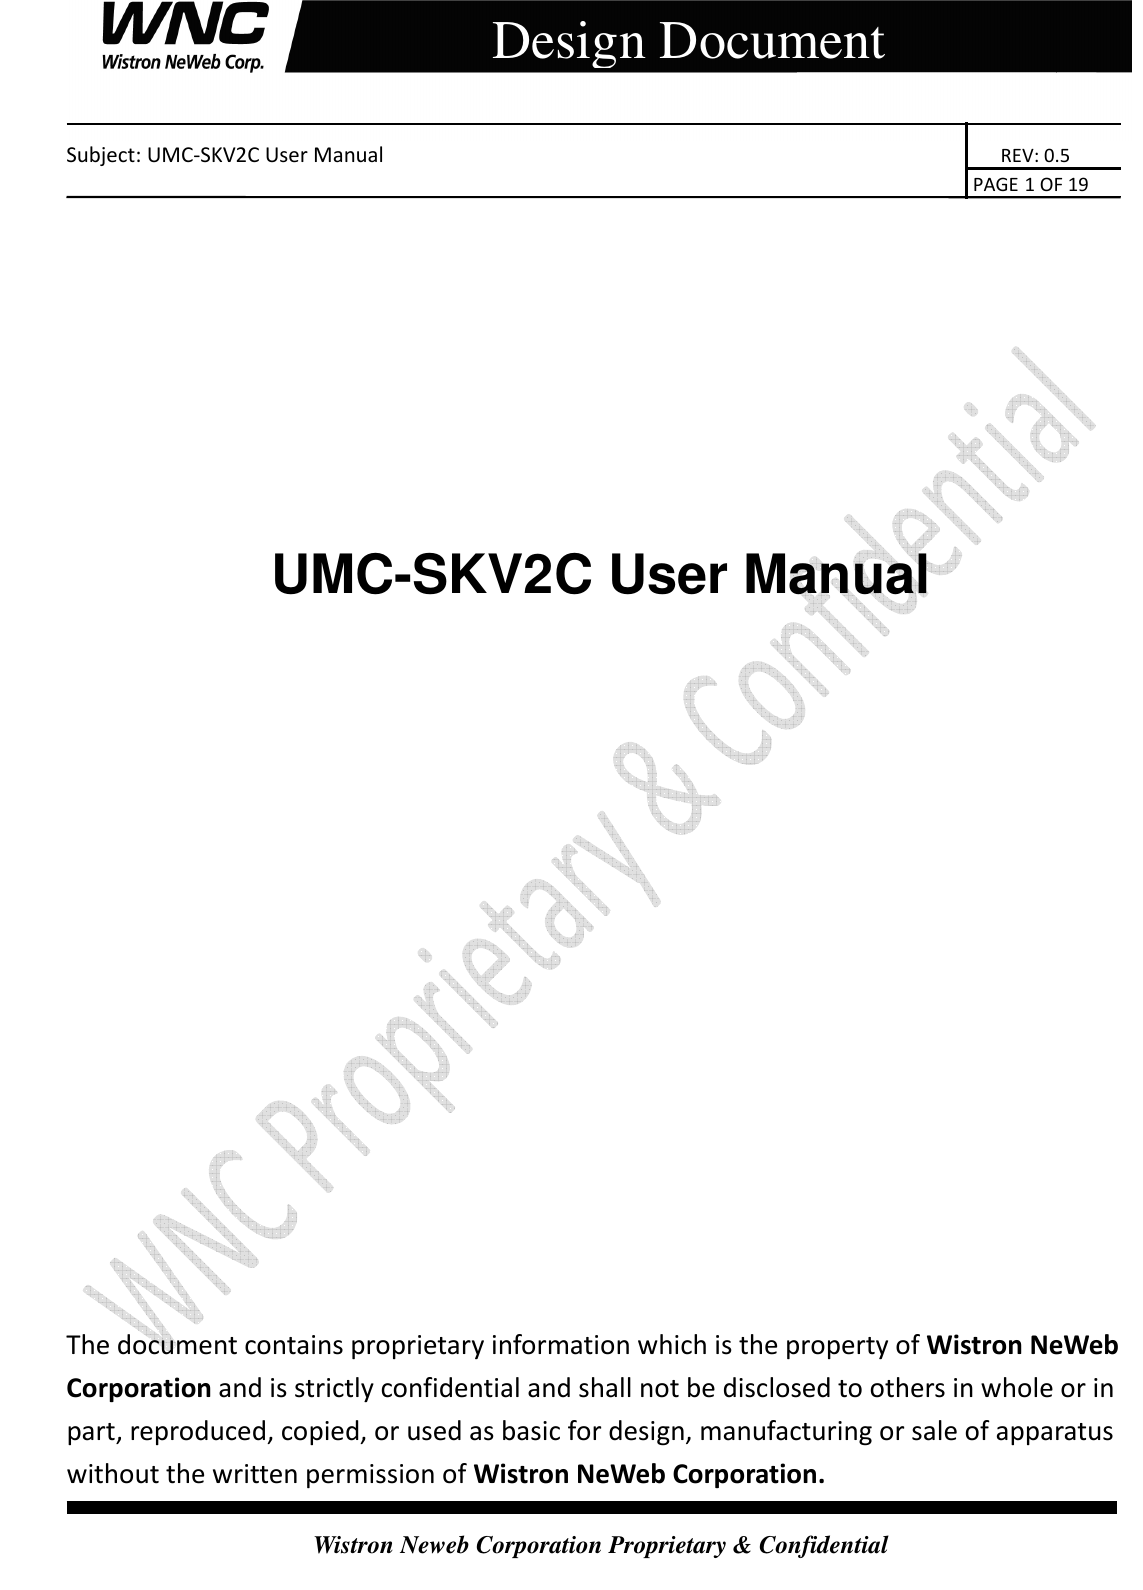    Subject: UMC-SKV2C User Manual                                                                       REV: 0.5                                                                                                                                                                               PAGE 1 OF 19  Wistron Neweb Corporation Proprietary &amp; Confidential     Design Document          UMC-SKV2C User Manual                    The document contains proprietary information which is the property of Wistron NeWeb Corporation and is strictly confidential and shall not be disclosed to others in whole or in part, reproduced, copied, or used as basic for design, manufacturing or sale of apparatus without the written permission of Wistron NeWeb Corporation. 